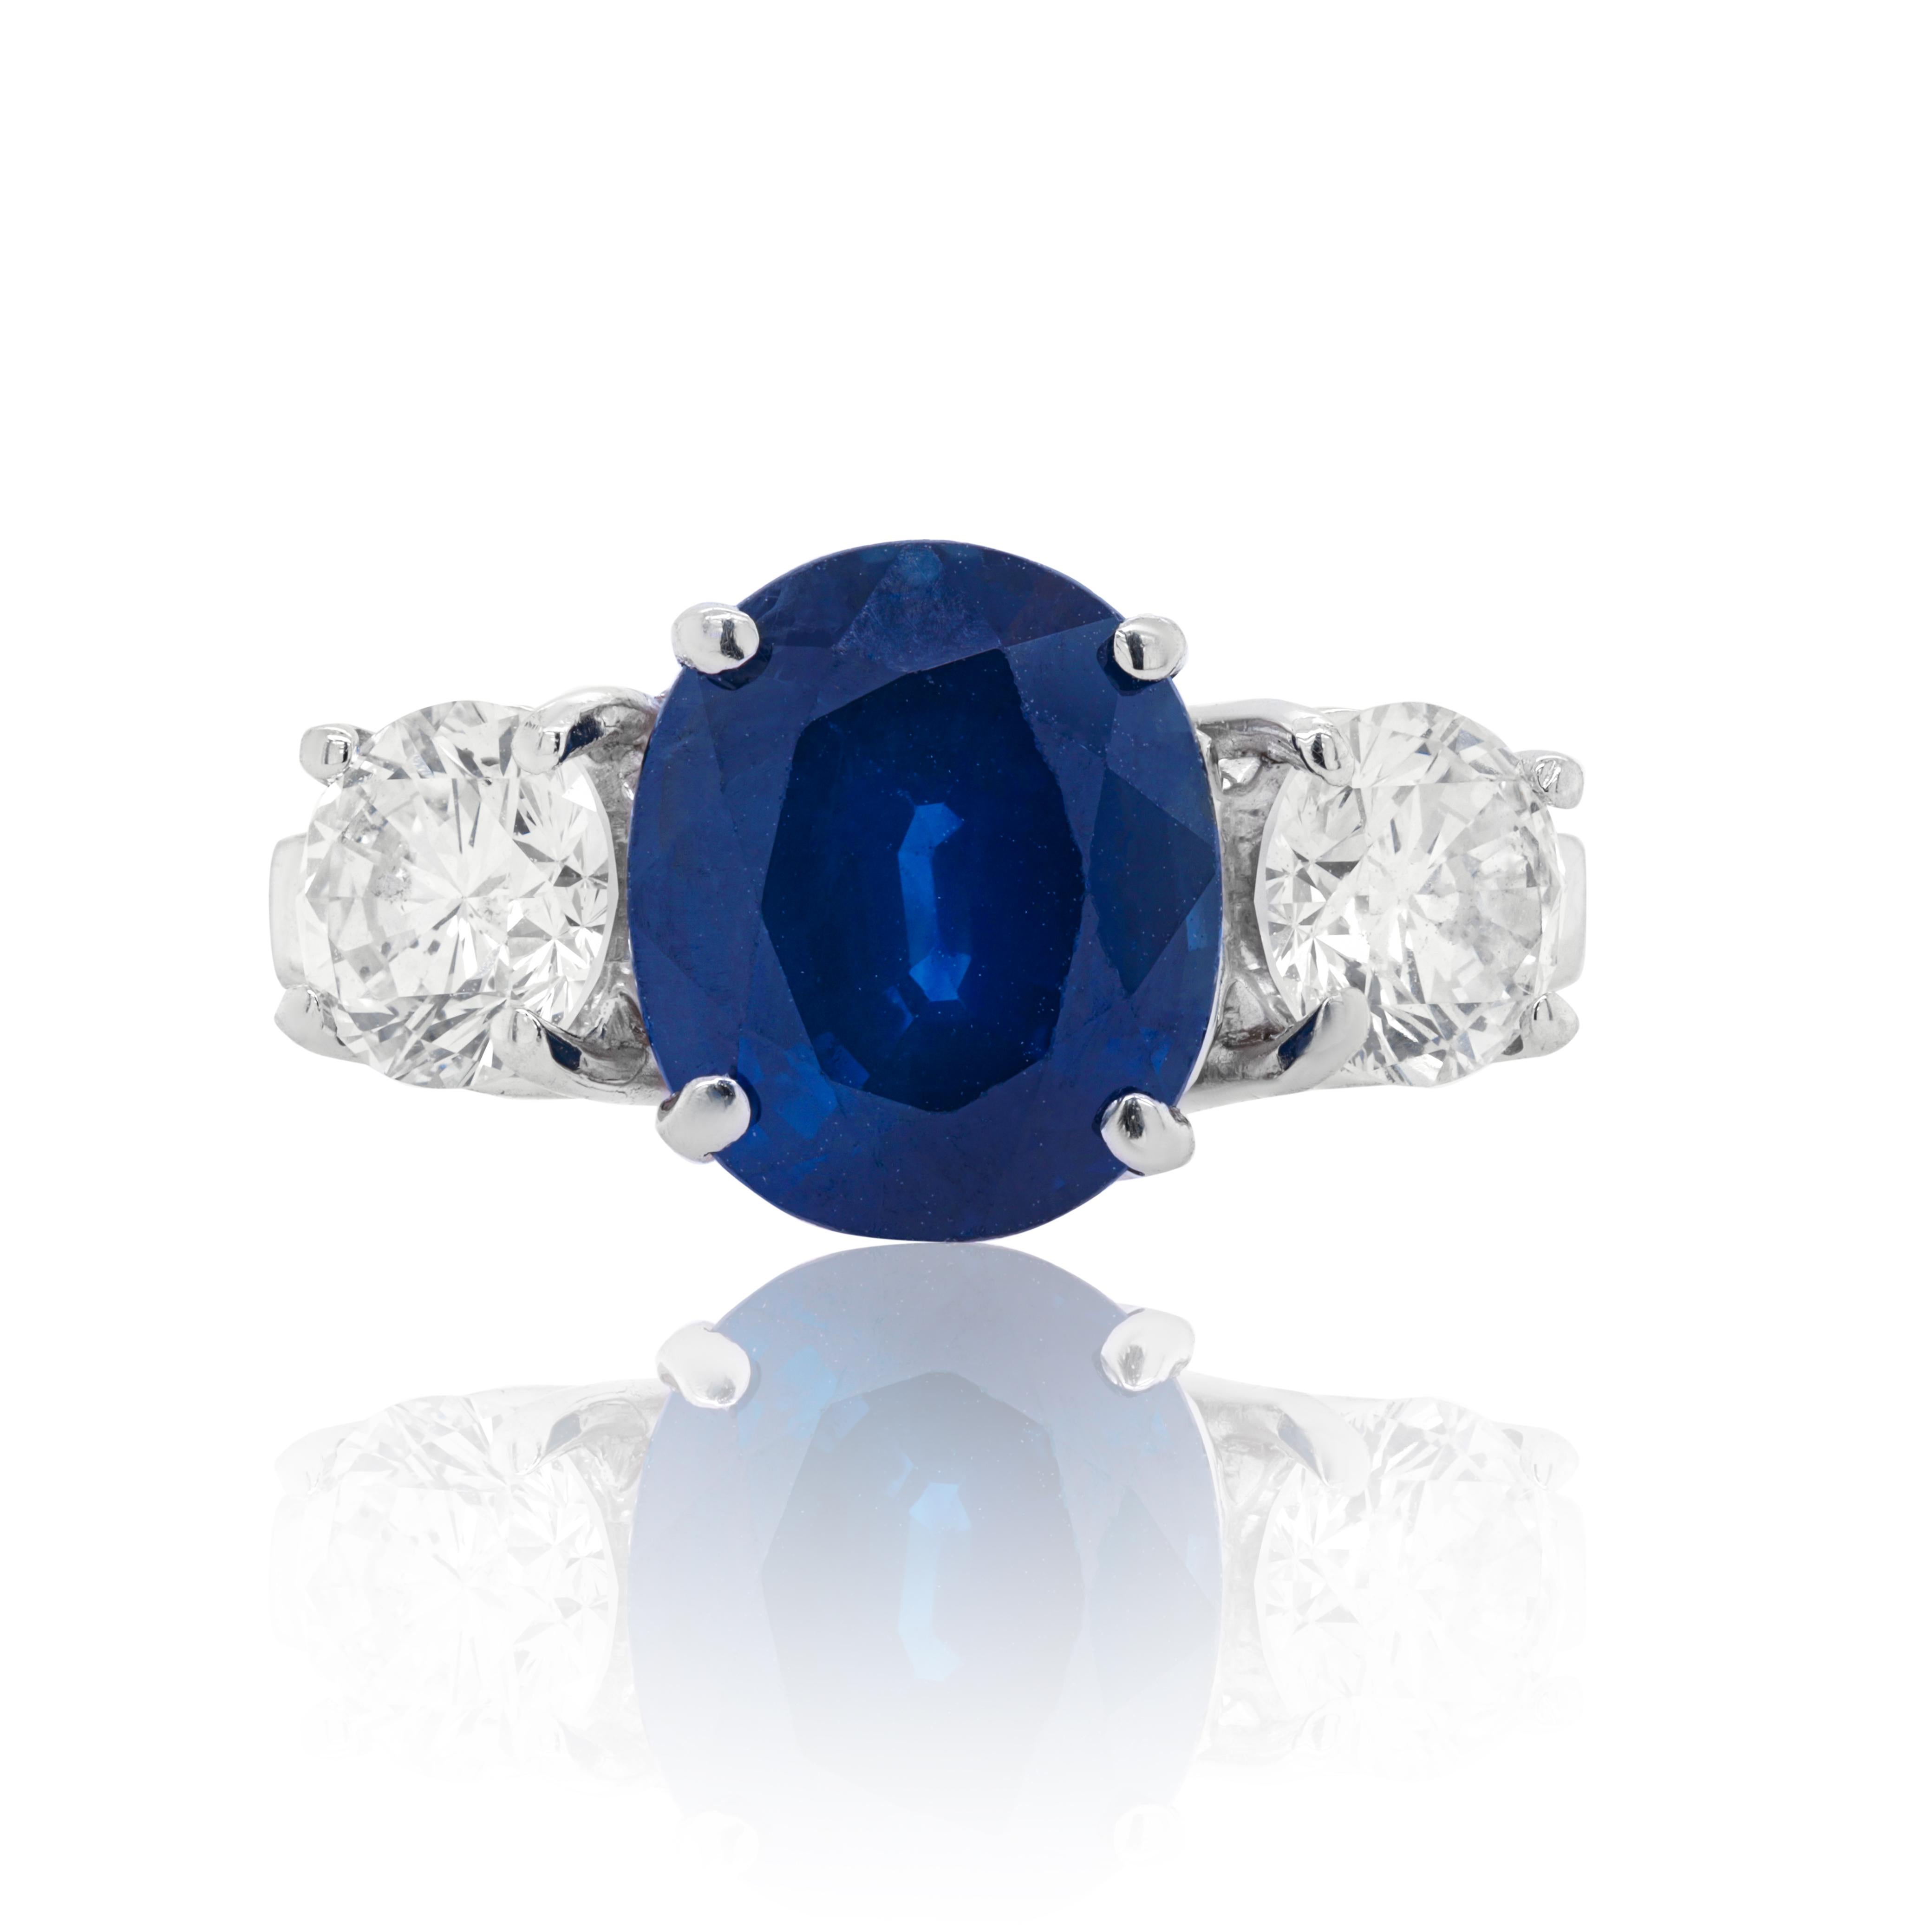 Platinum sapphire and diamond ring features 3.94 carat of sapphire as a center stone and 1.45 carat of diamonds
